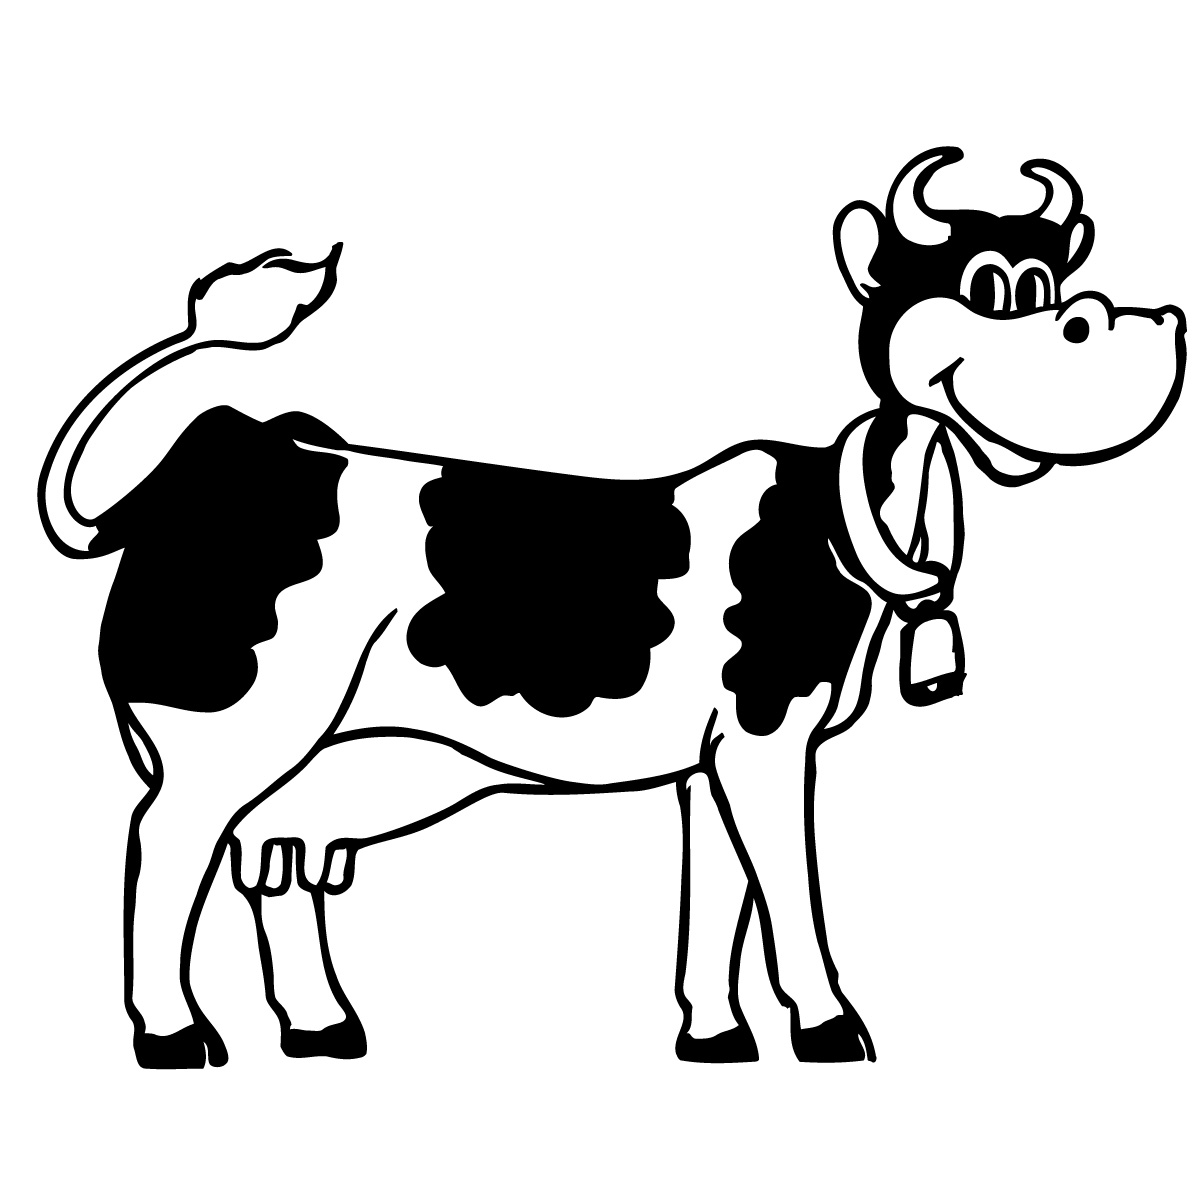 Funny Cow Cartoon Pictures   Clipart Best